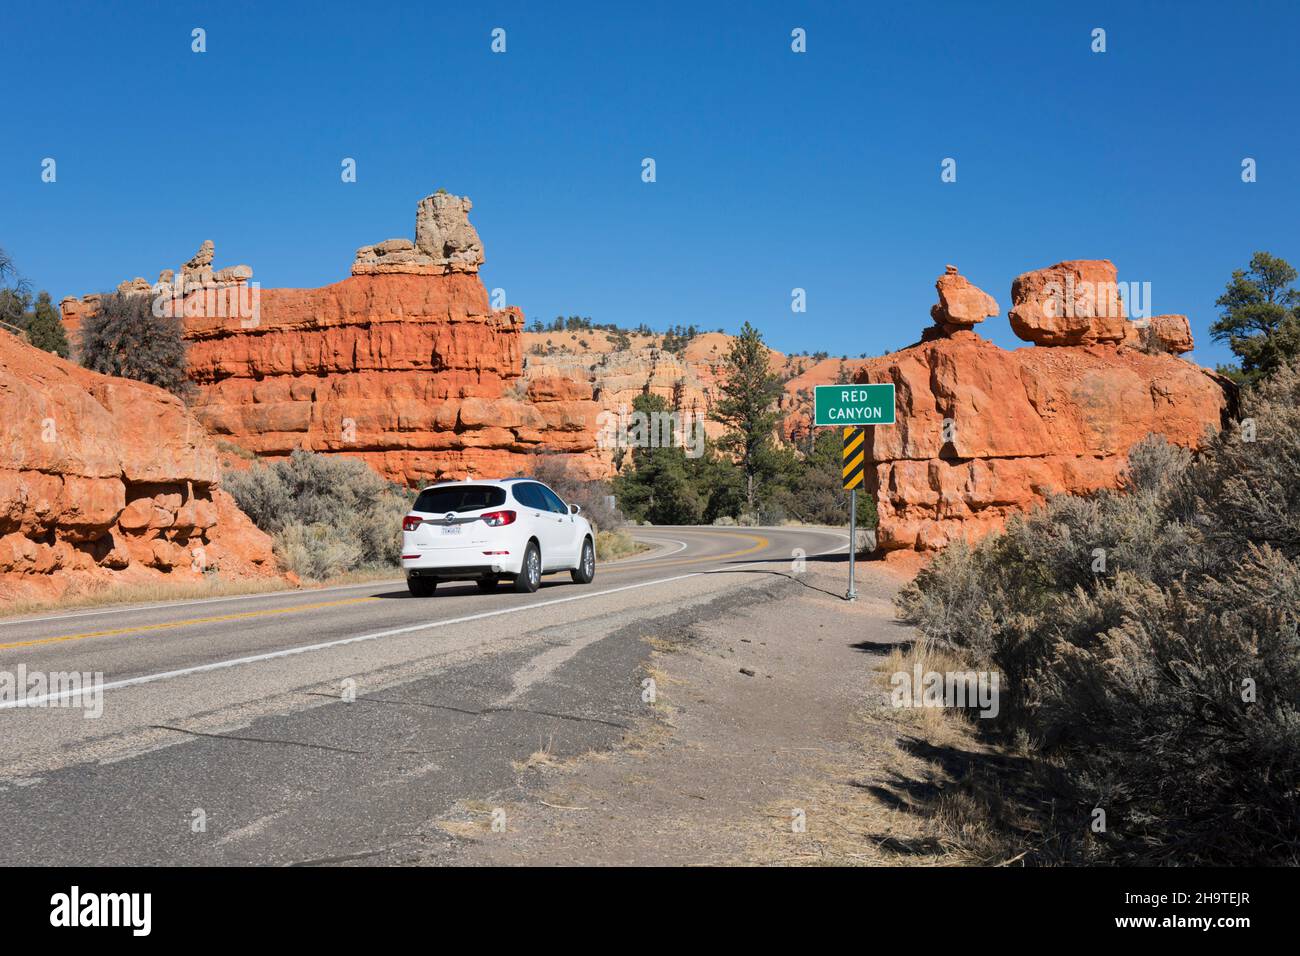 Dixie National Forest, Panguitch, Utah, USA. White car on Utah State Route 12 passing road sign marking the entrance to Red Canyon. Stock Photo